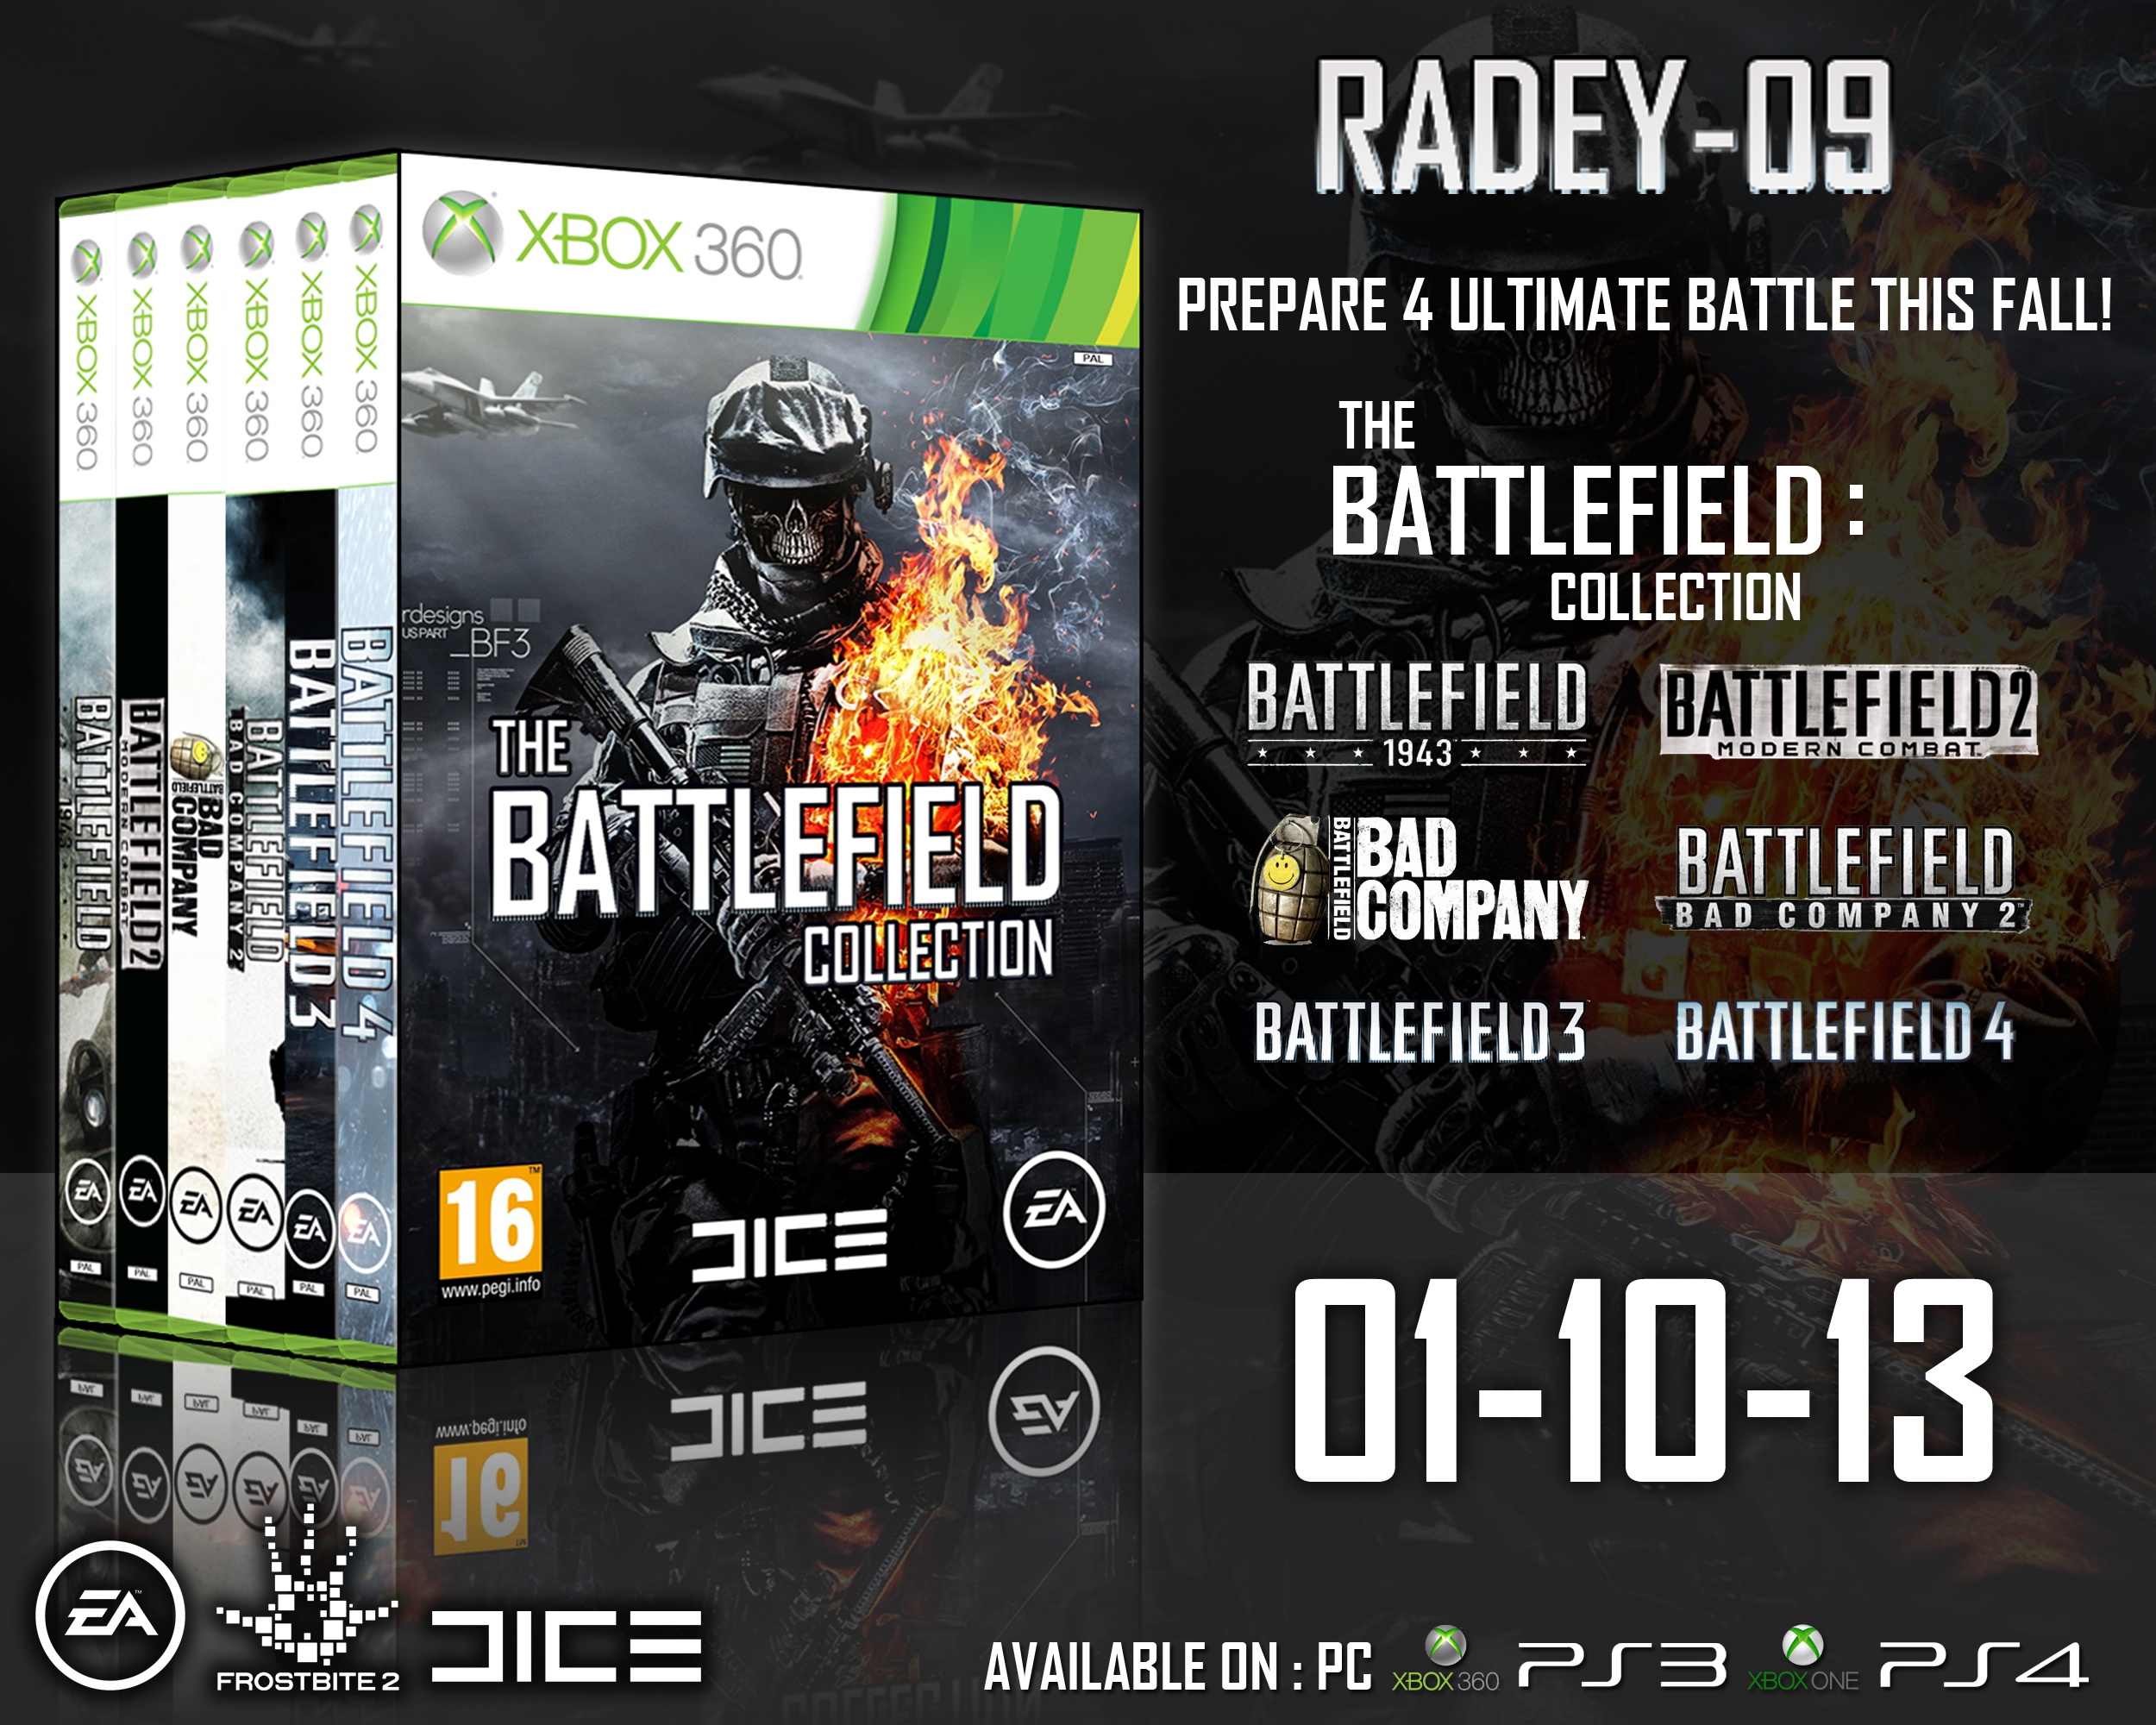 The Battlefield Collection box cover